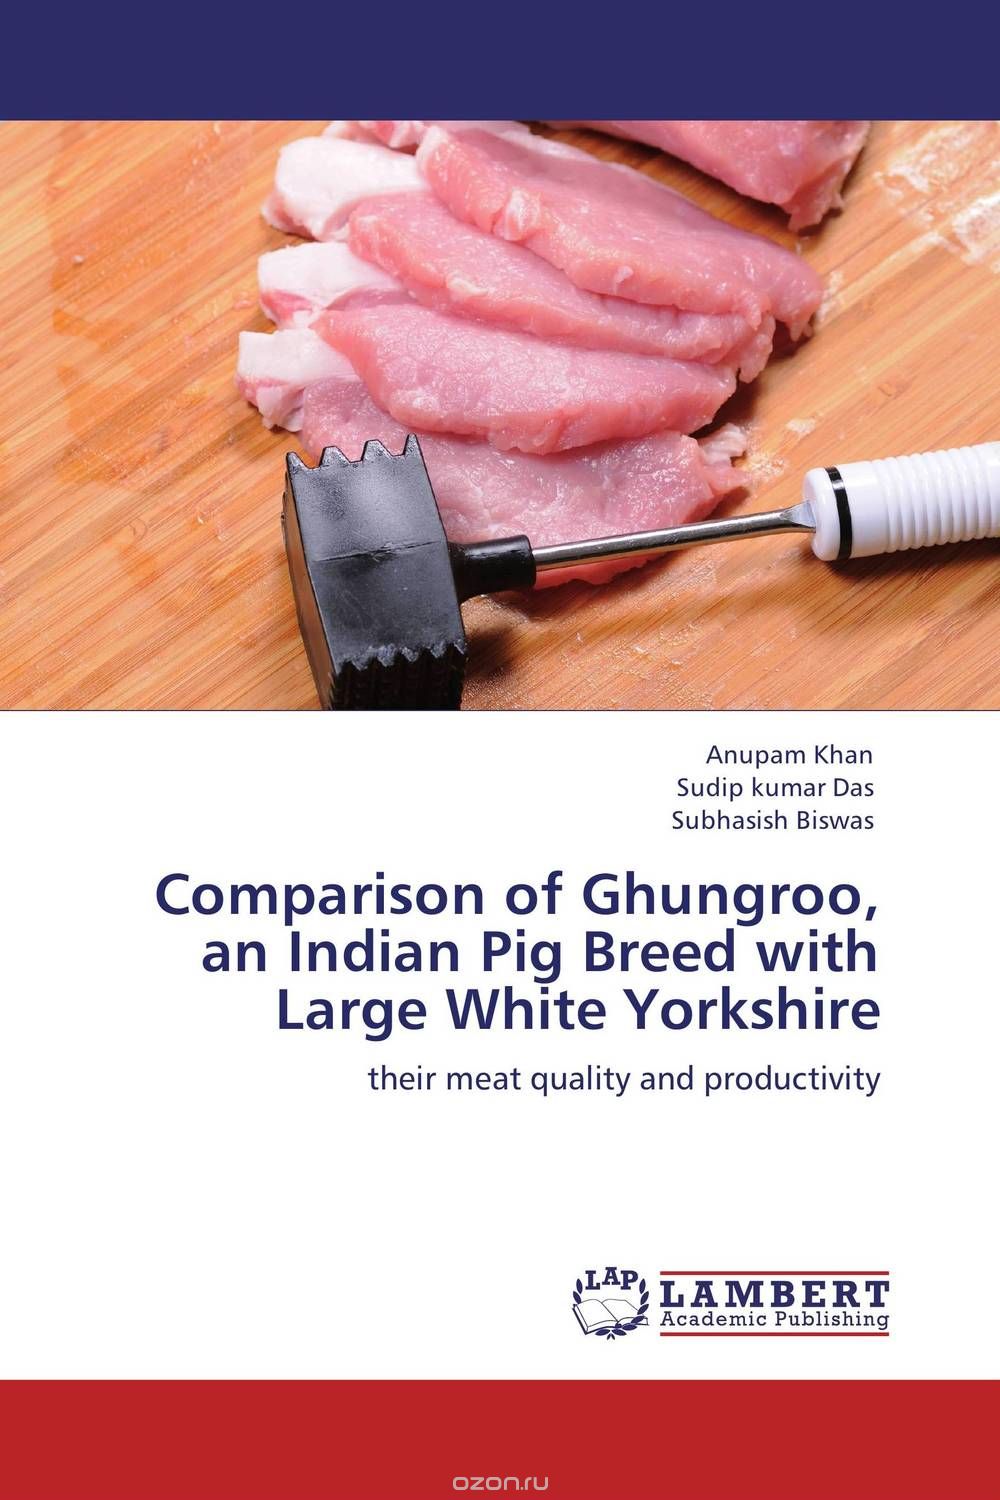 Скачать книгу "Comparison of Ghungroo, an Indian Pig Breed with Large White Yorkshire"